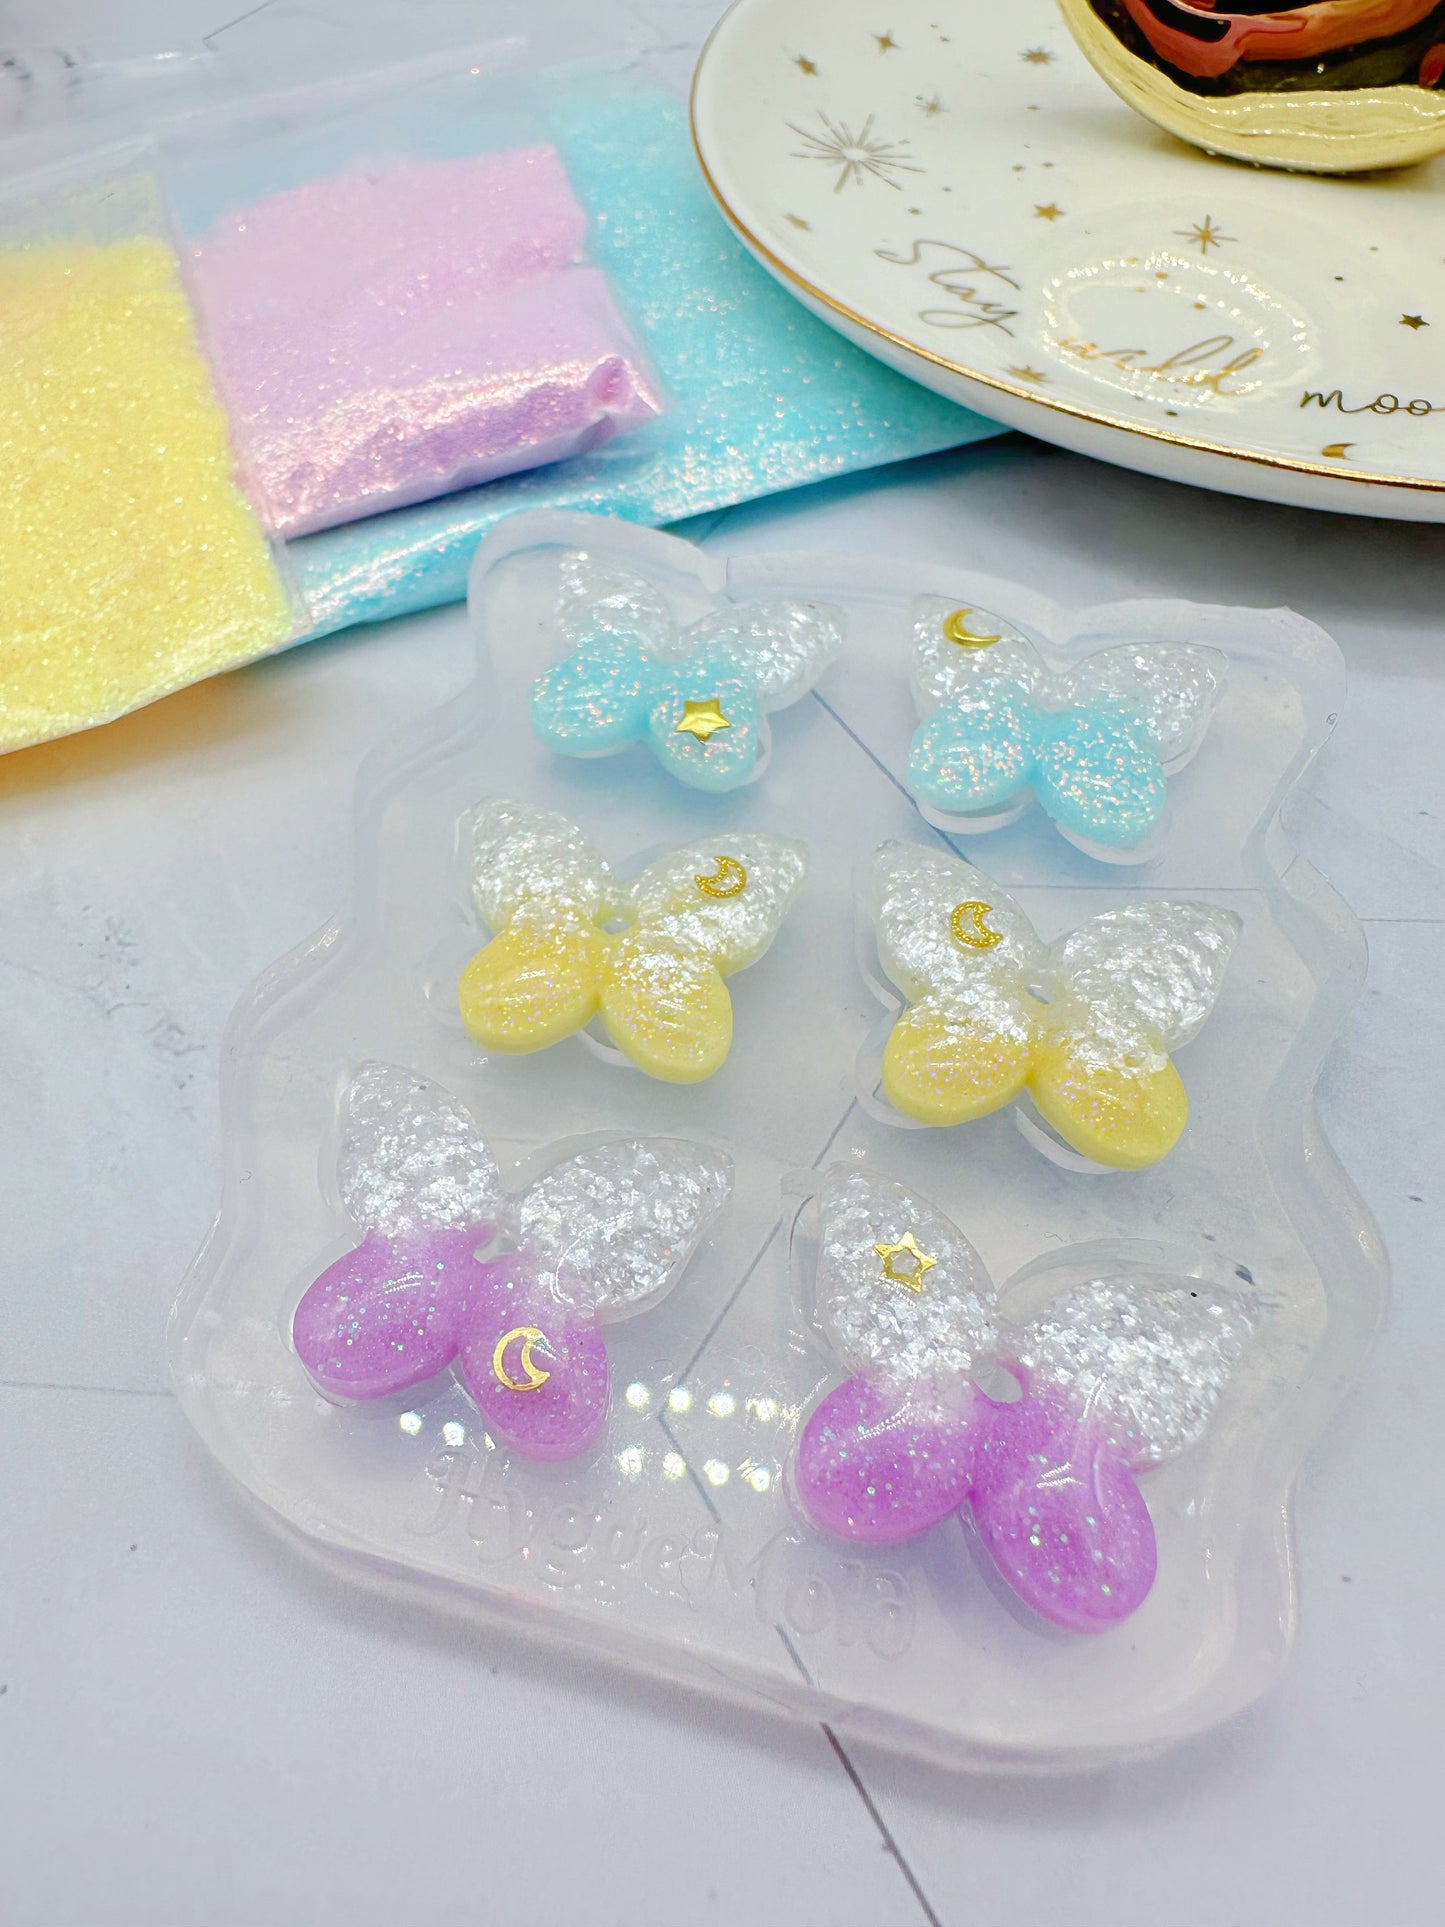 Small Pre domed Butterfly Dangle Earring Mold